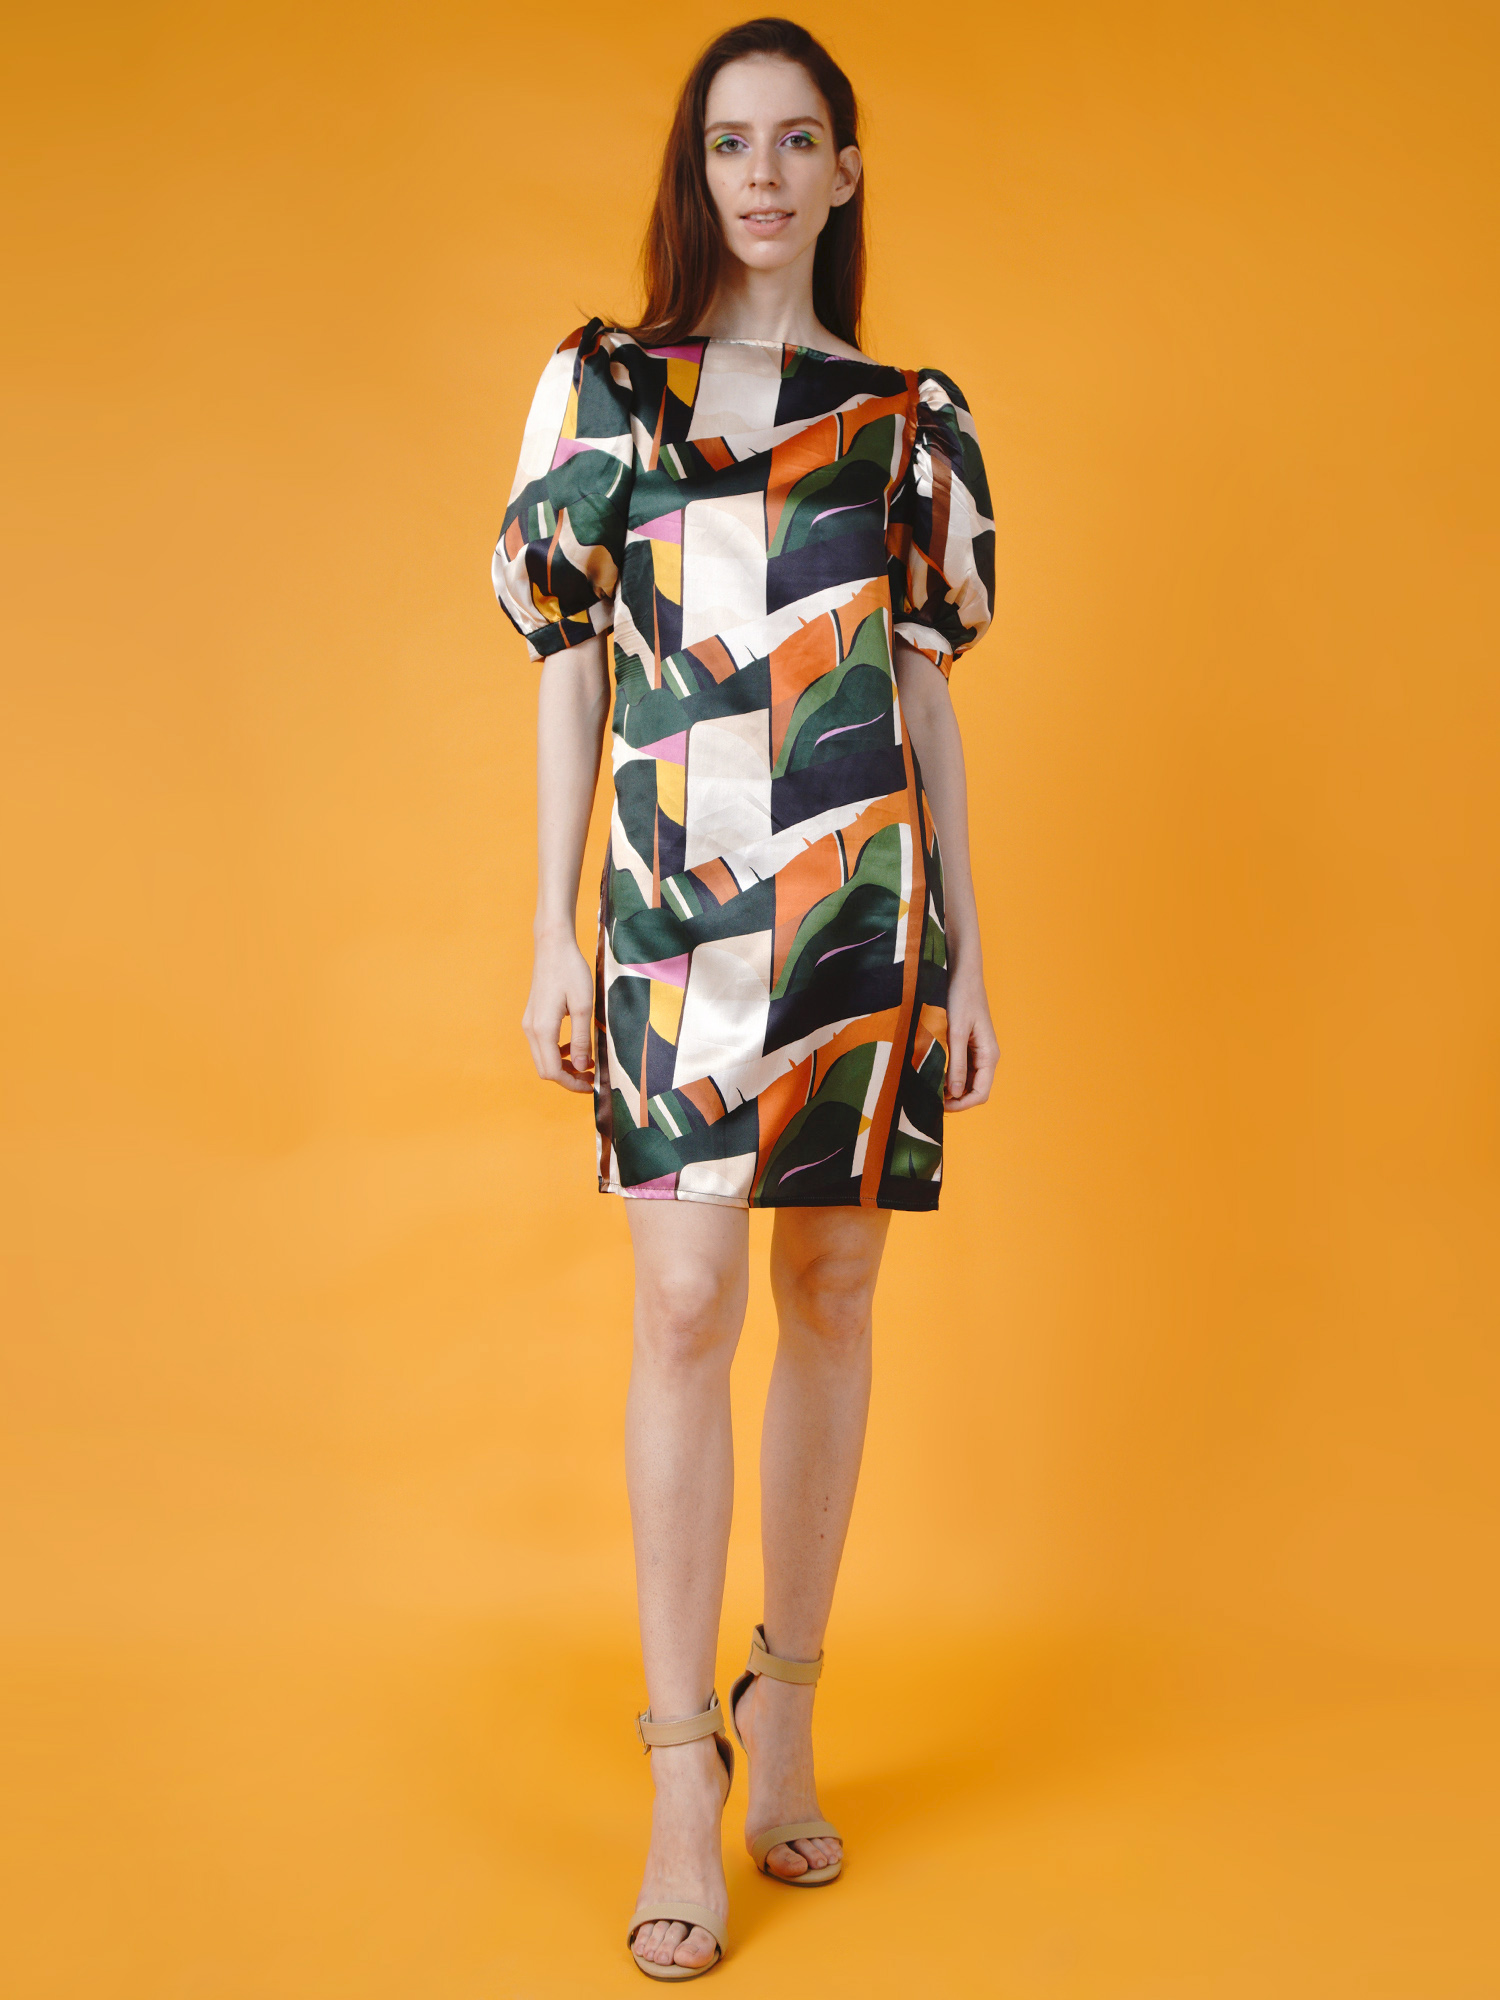 Colorful abstract dress - Back